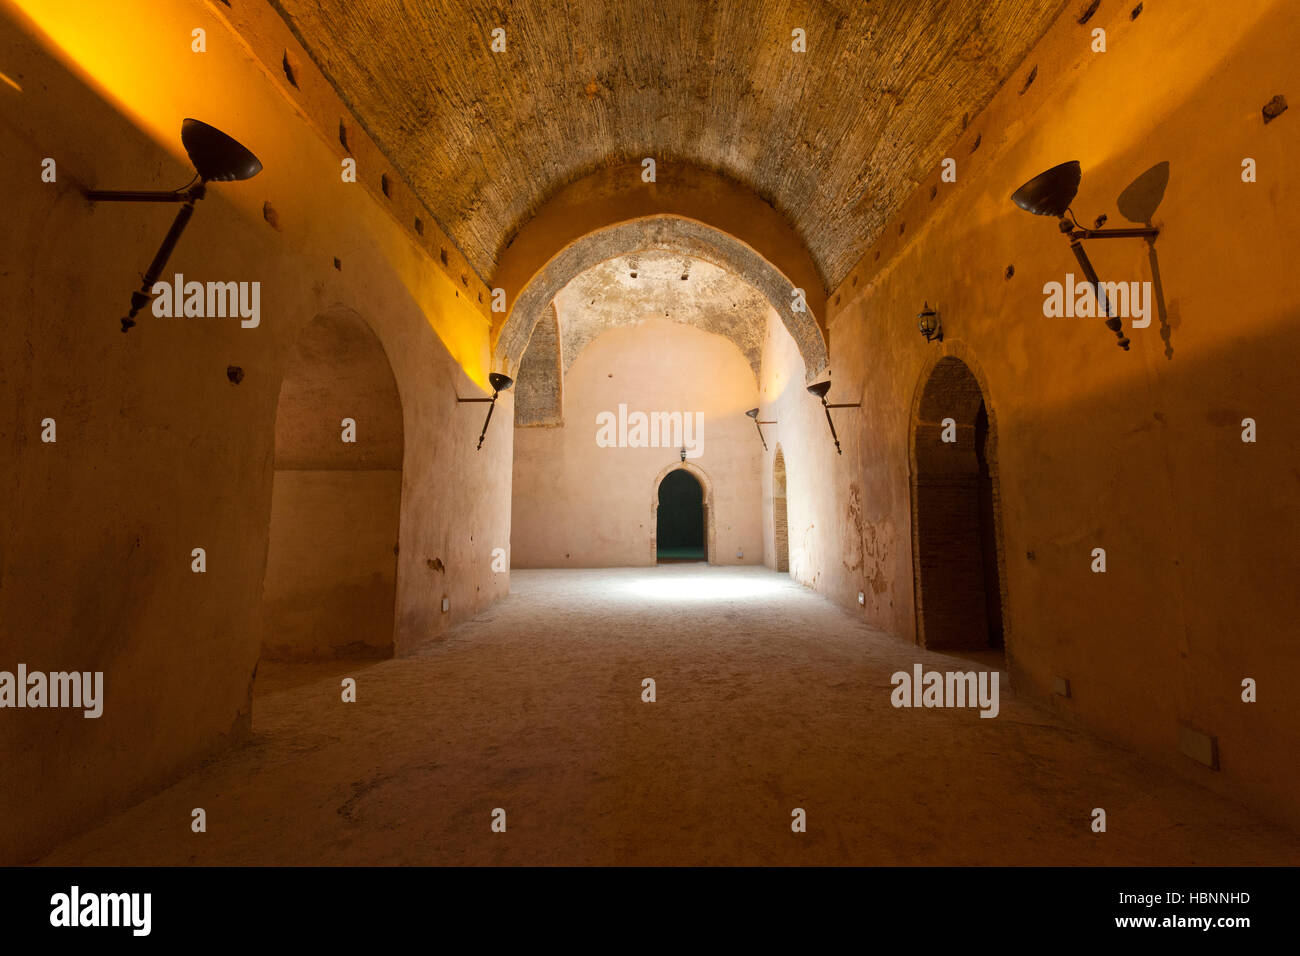 Interiors of the 'Royal Stables'. Meknes, Morocco. Stock Photo